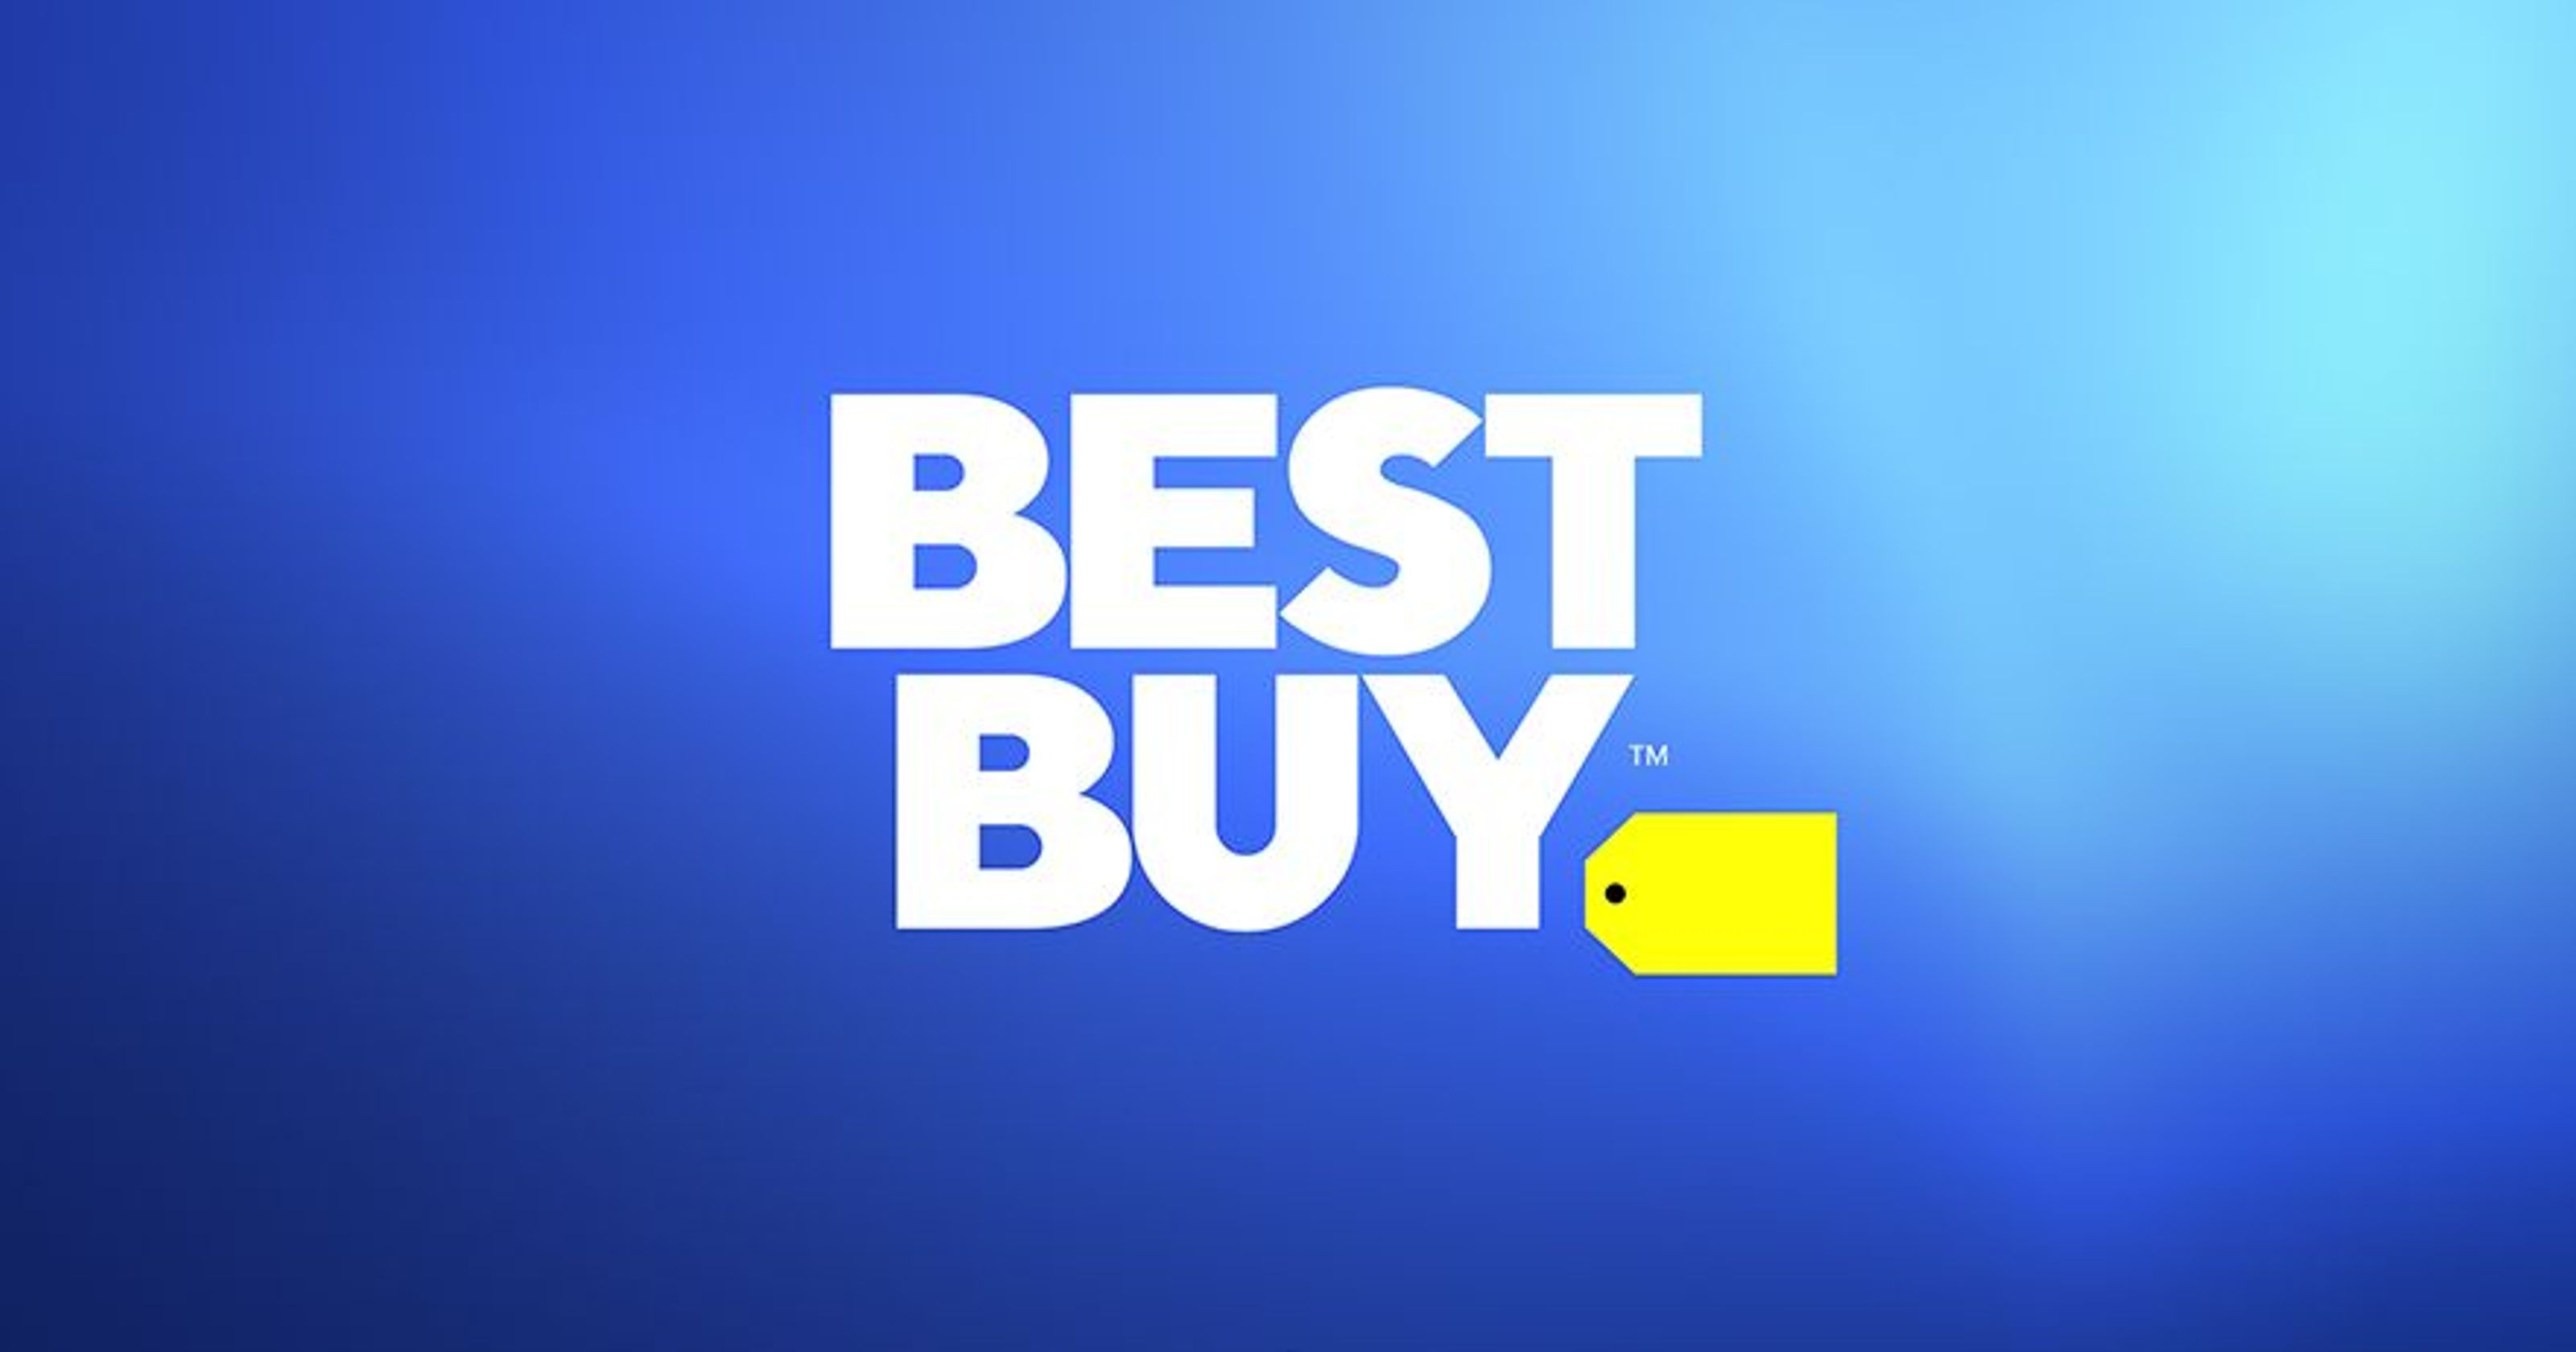 Customers Reviews about Best Buy